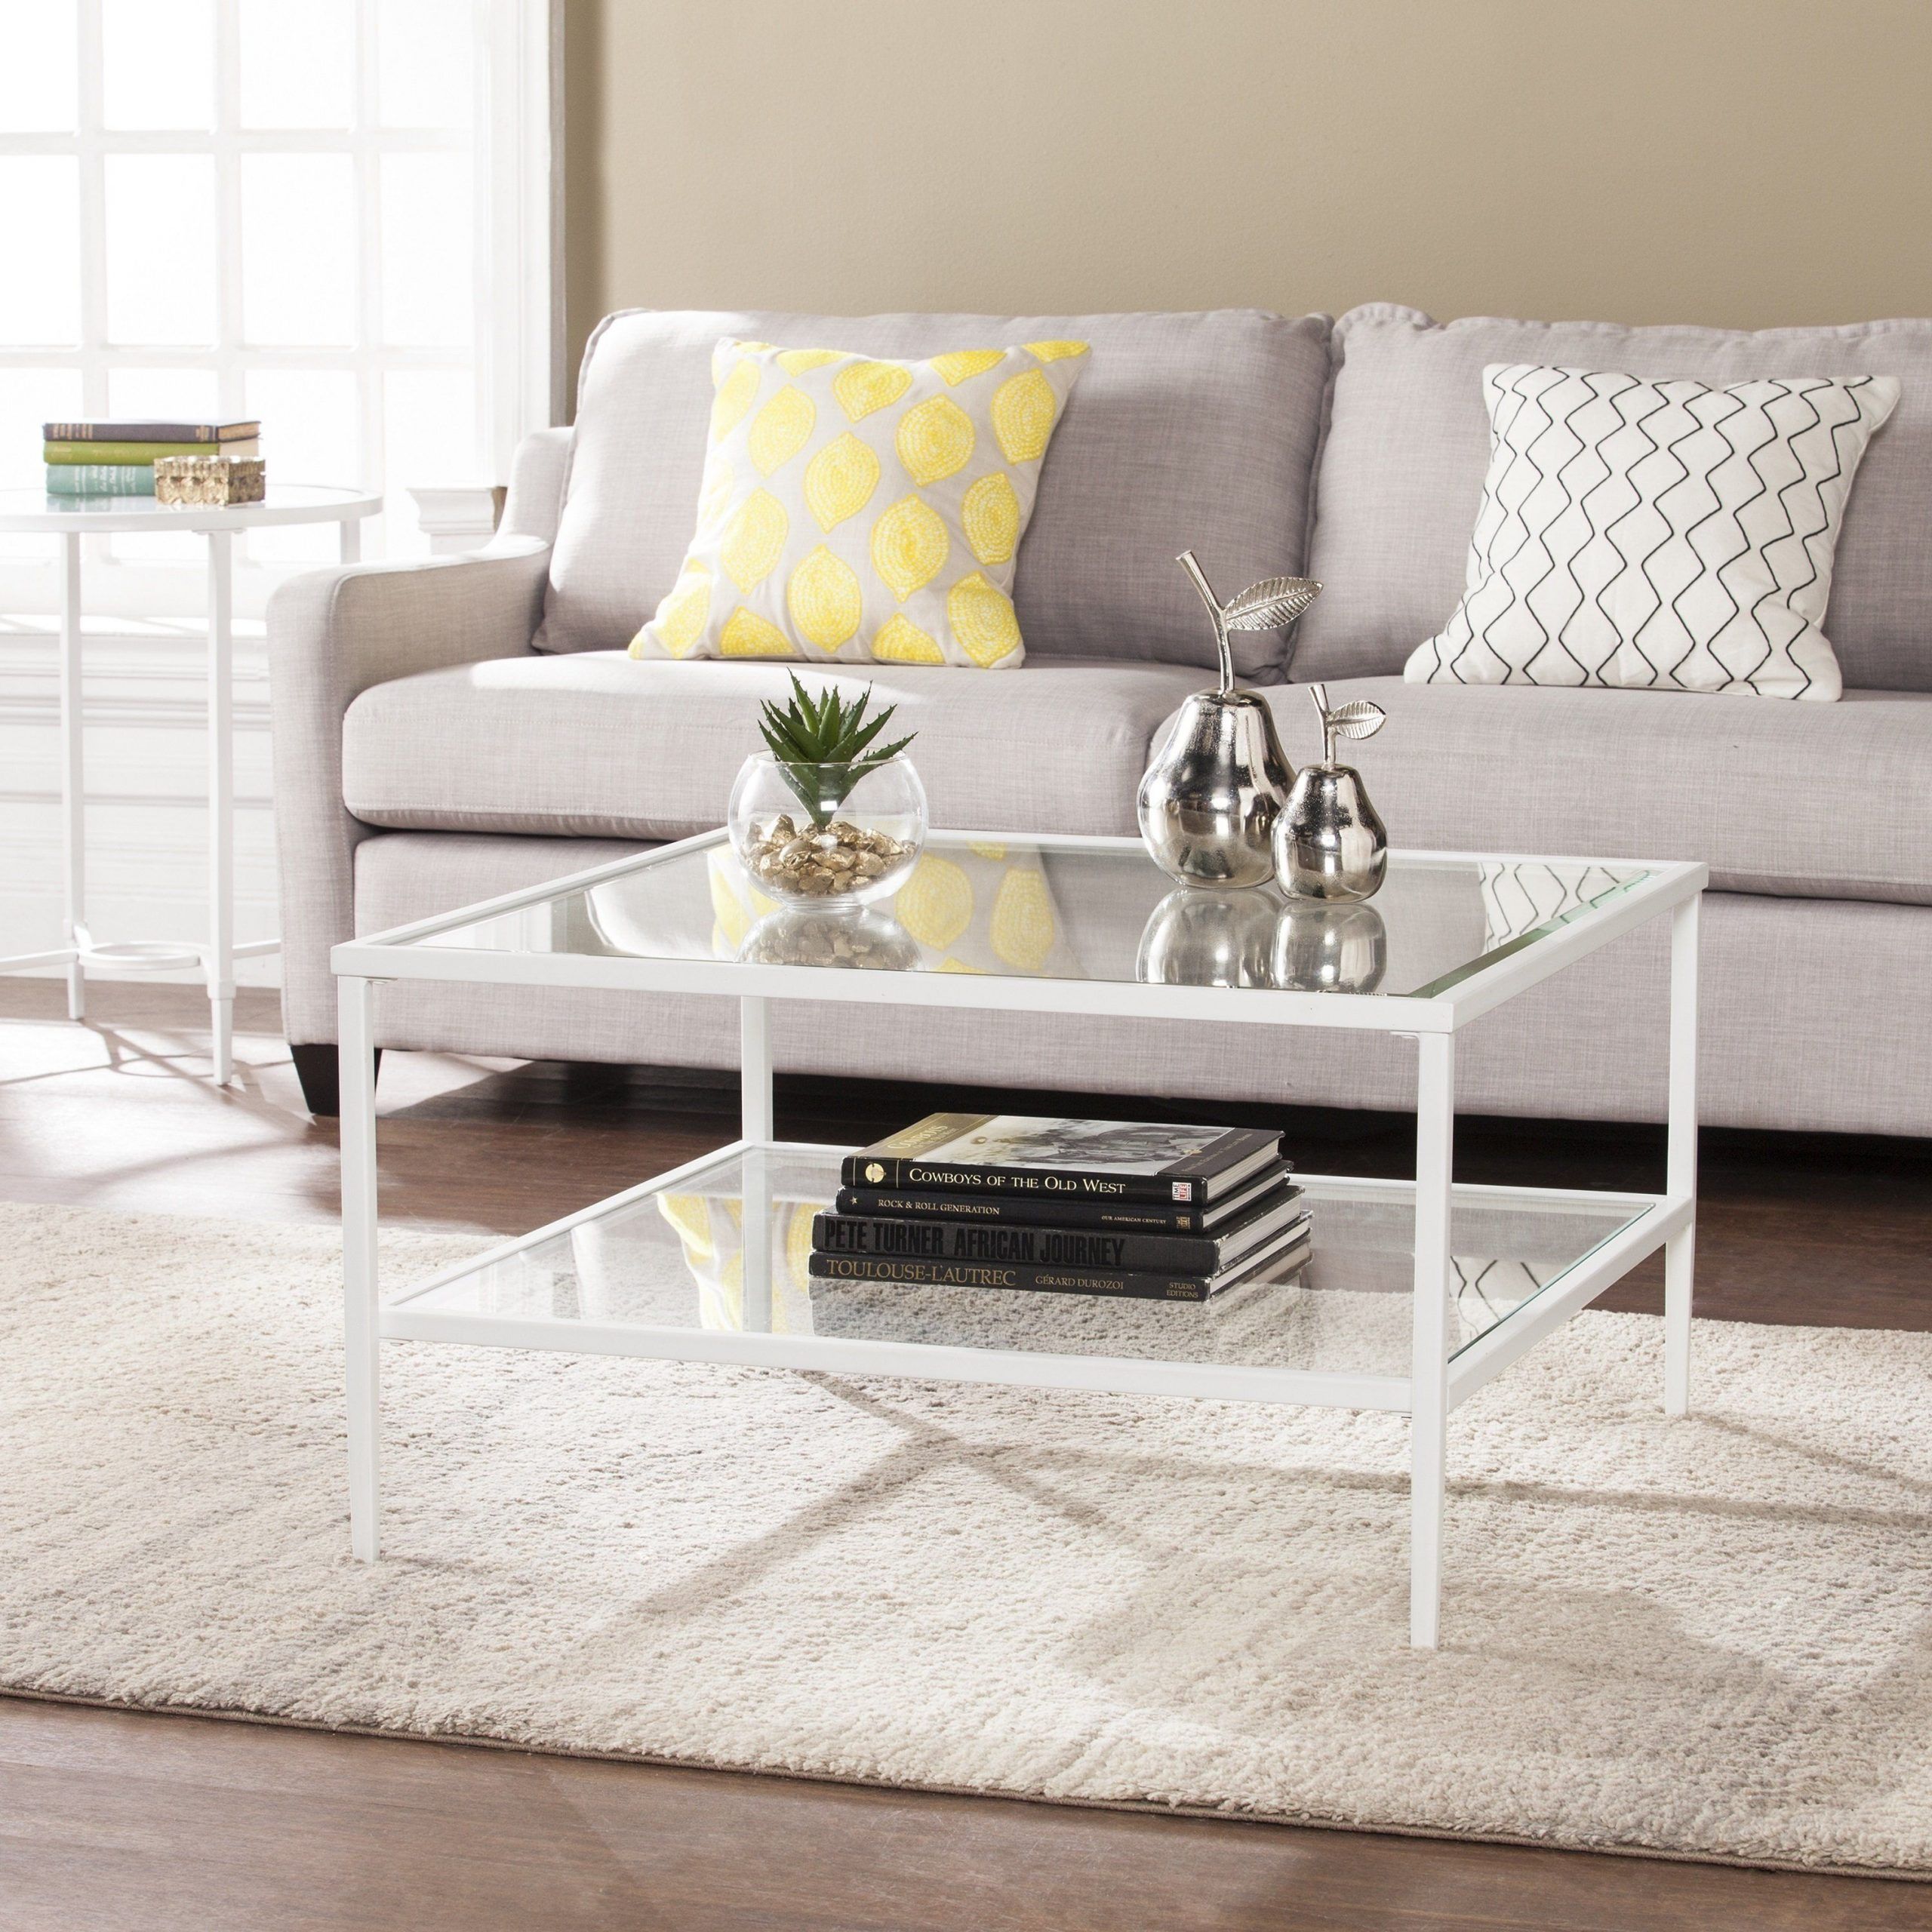 Clay Alder Home Sorlie Metal/glass Open Shelf Cocktail Table – White  (os0173kc) | Coffee Table, Coffee Table White, Coffee Table Square With Regard To Glass Open Shelf Coffee Tables (View 3 of 15)